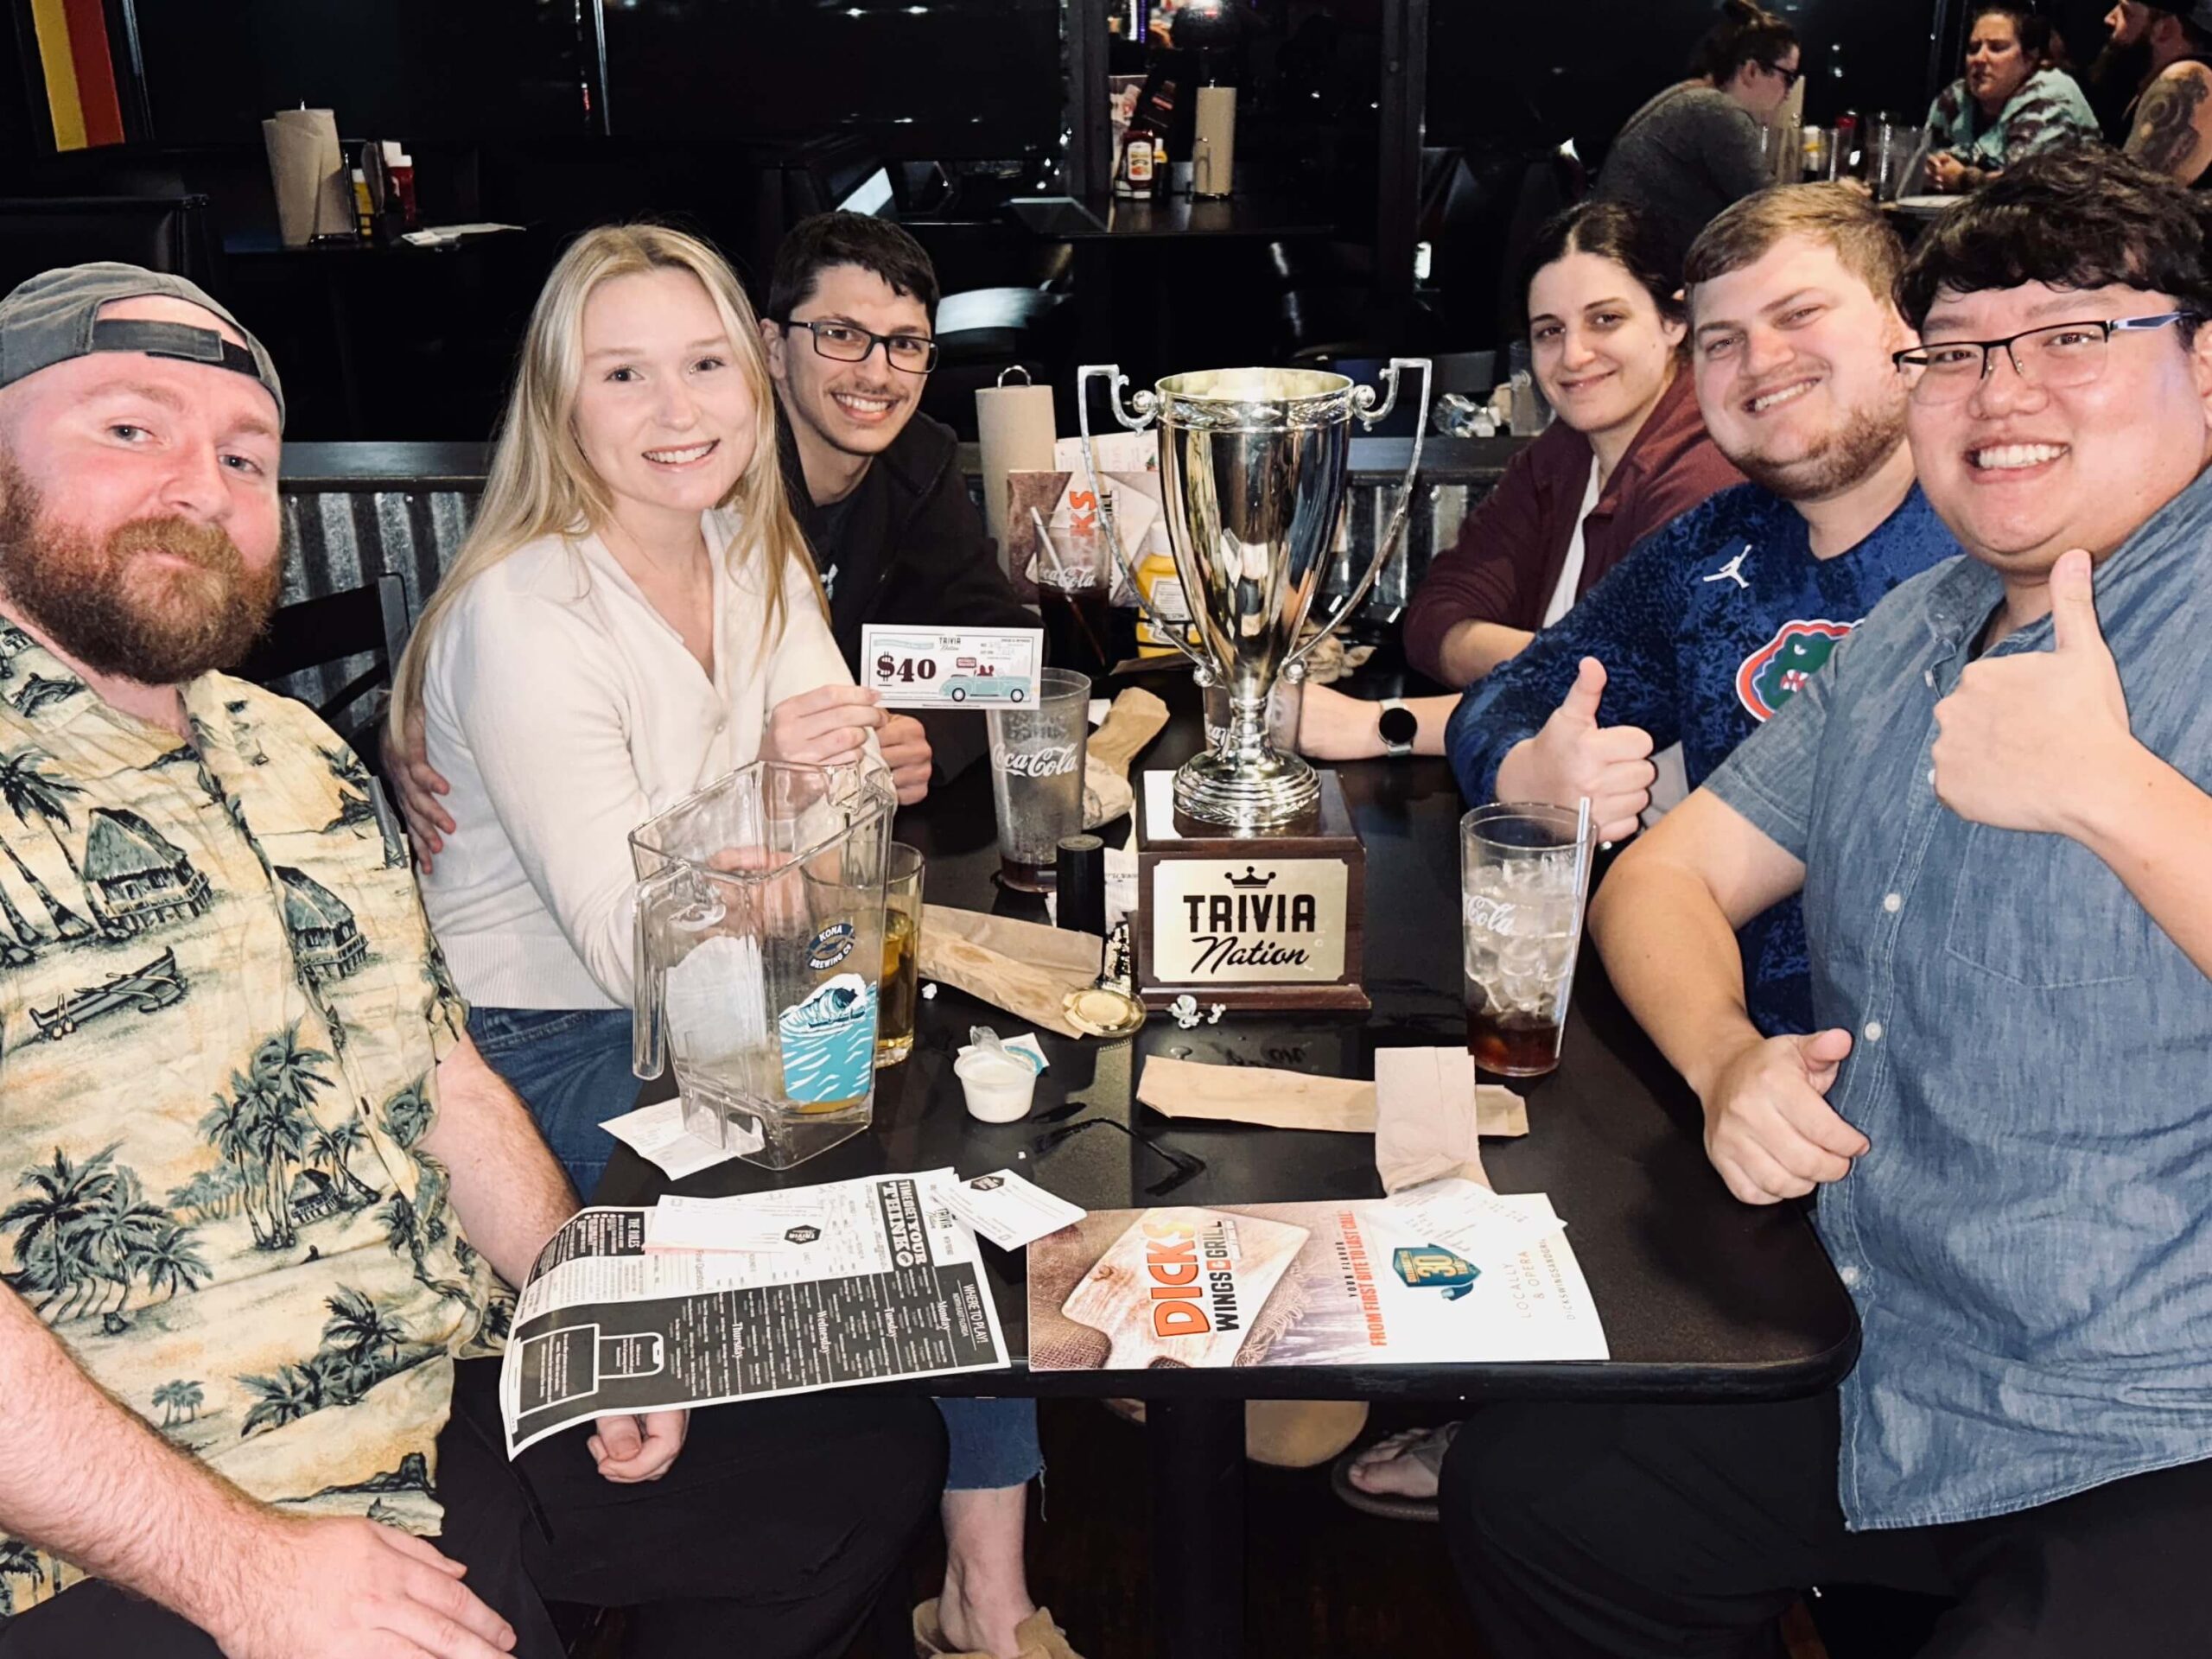 Dick's Wings & Grill Jacksonville FL 32257 trivia night: group of six young adults seated at a table smiling with a Trivia Nation trophy on the table and two of the men holding up "thumbs up" signs